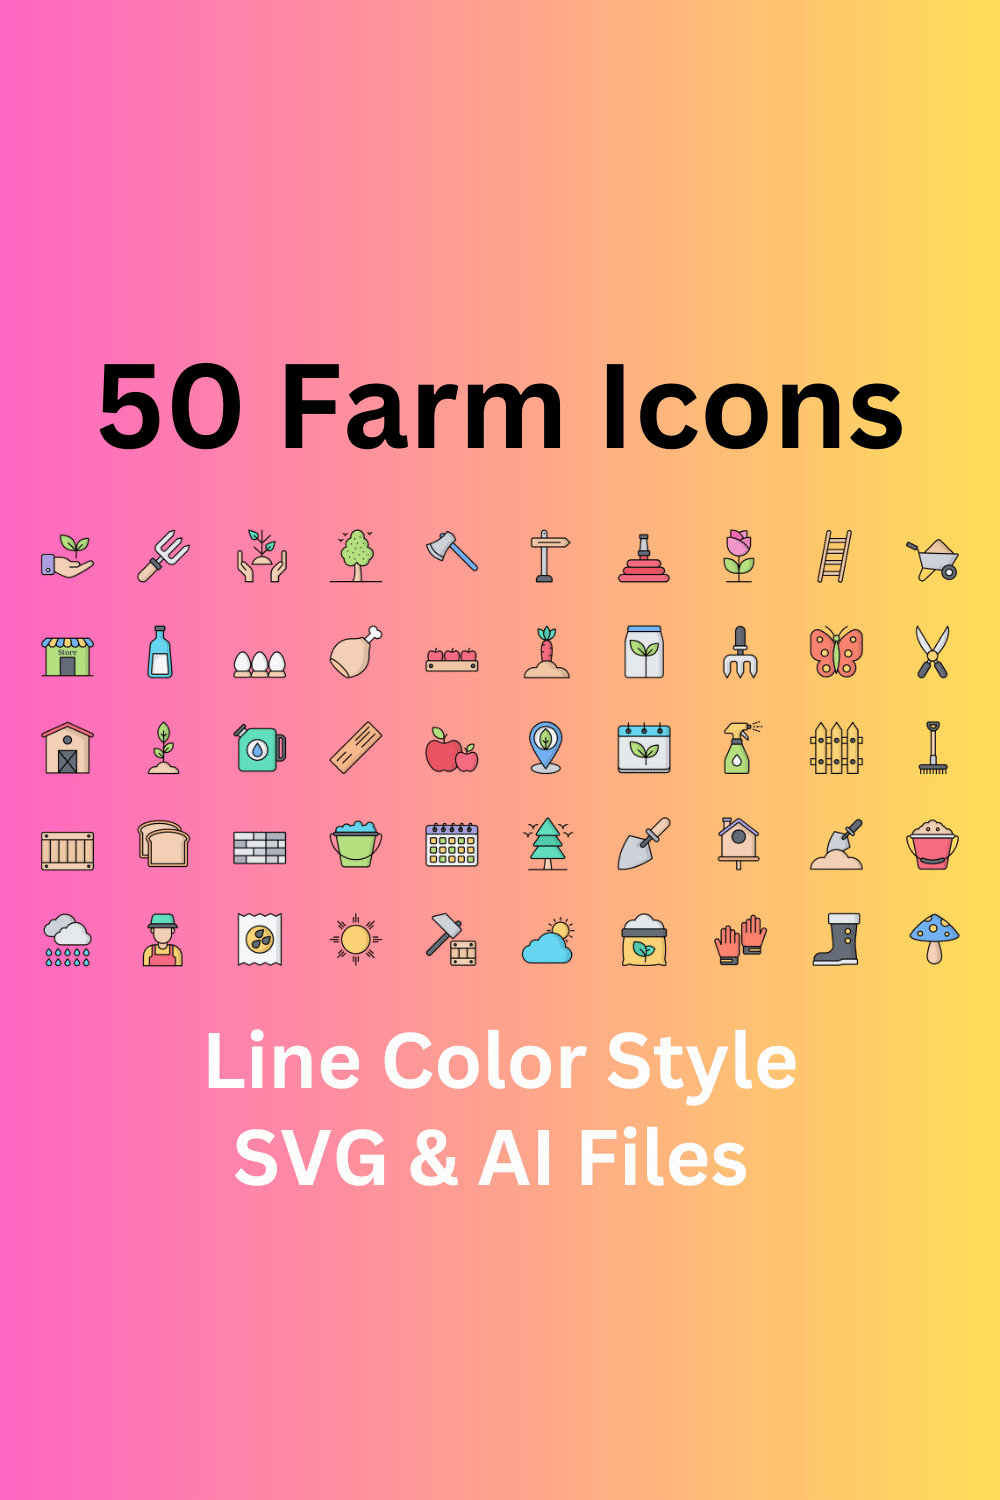 Carpentry Icon Set 50 Line Color Icons - SVG And AI Files pinterest preview image.